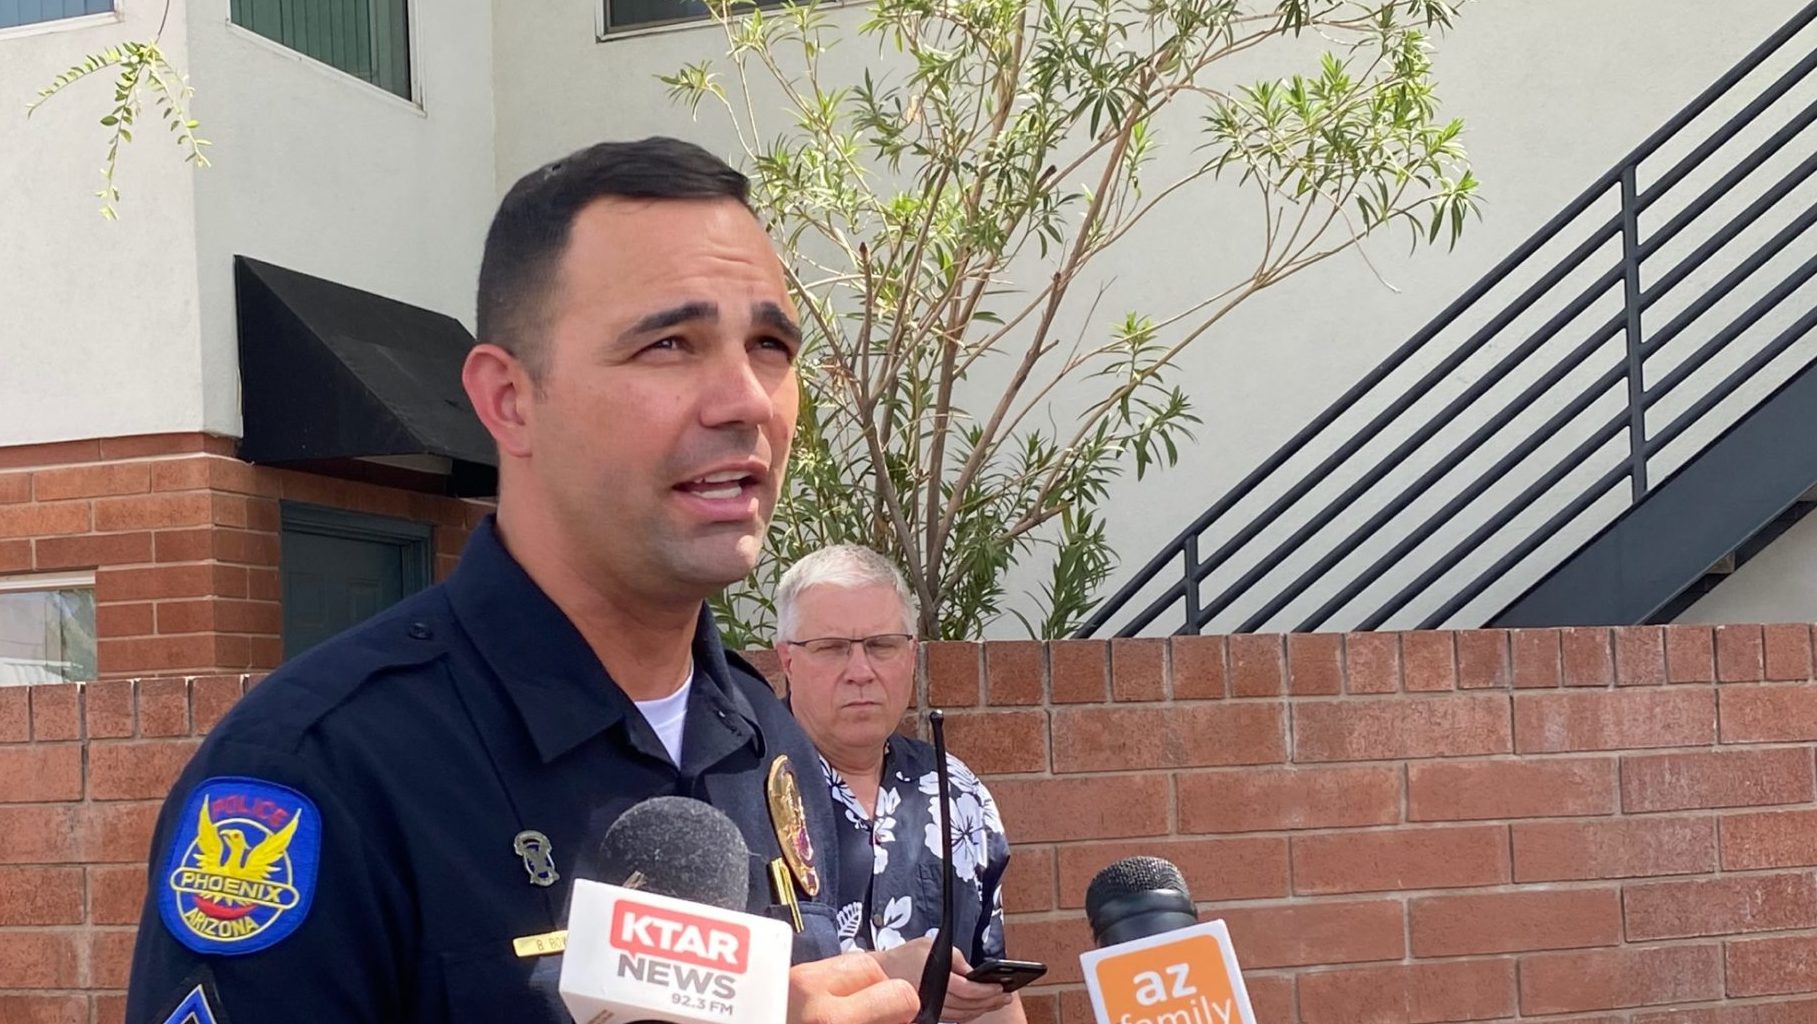 Phoenix Police Sgt. Brian Bower provided updates to the media about an incident that unfolded in Ce...